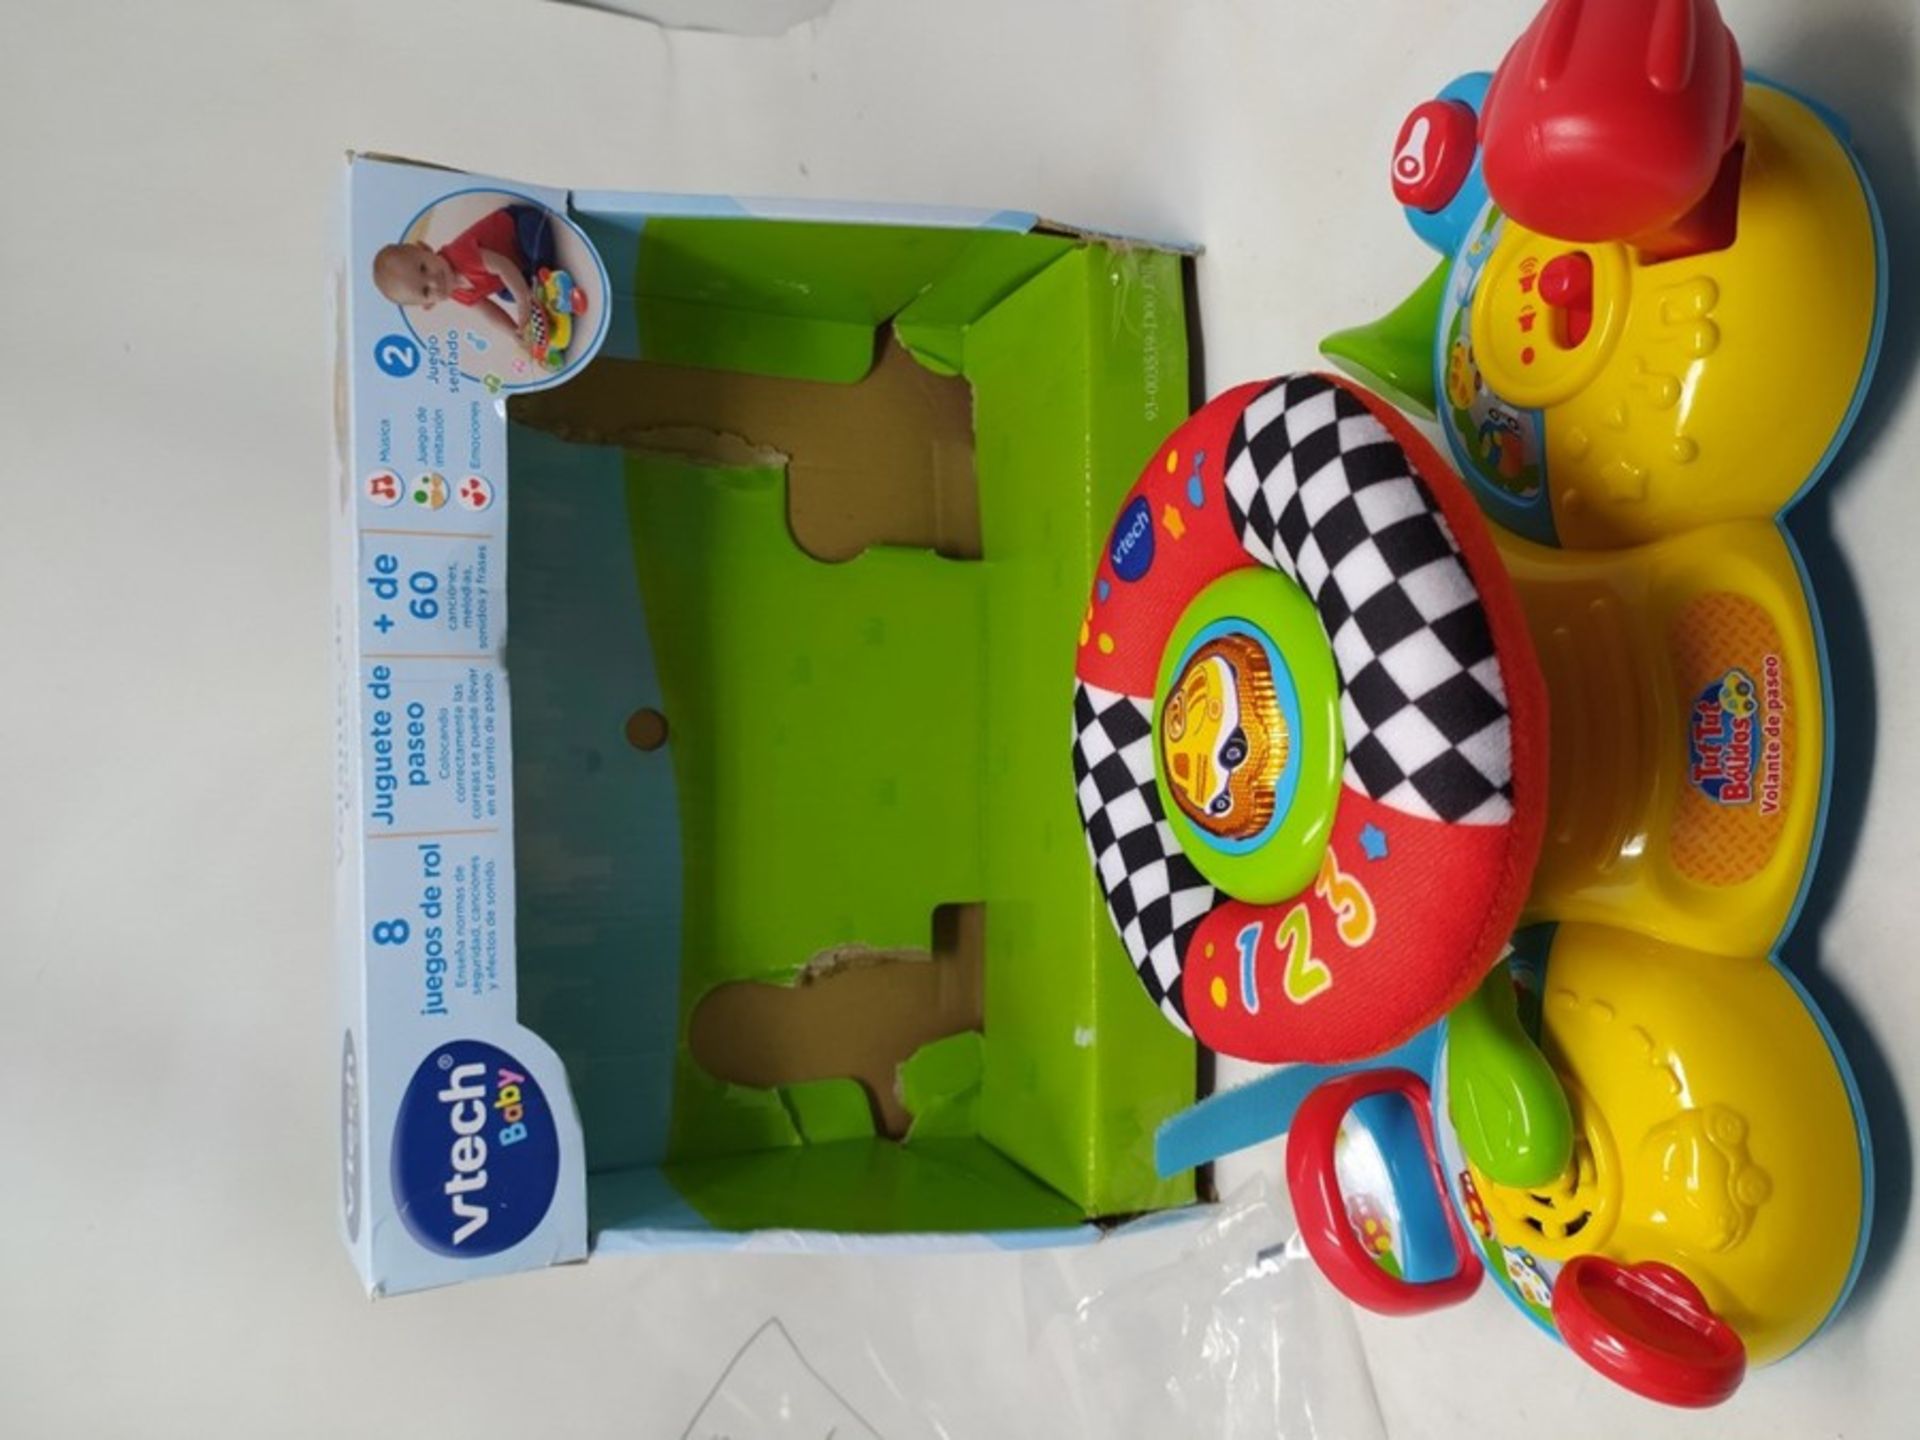 VTech Steering Wheel Tut Tut Drive, Stroller Toy with Holding Strips, Driving Simulato - Image 3 of 3